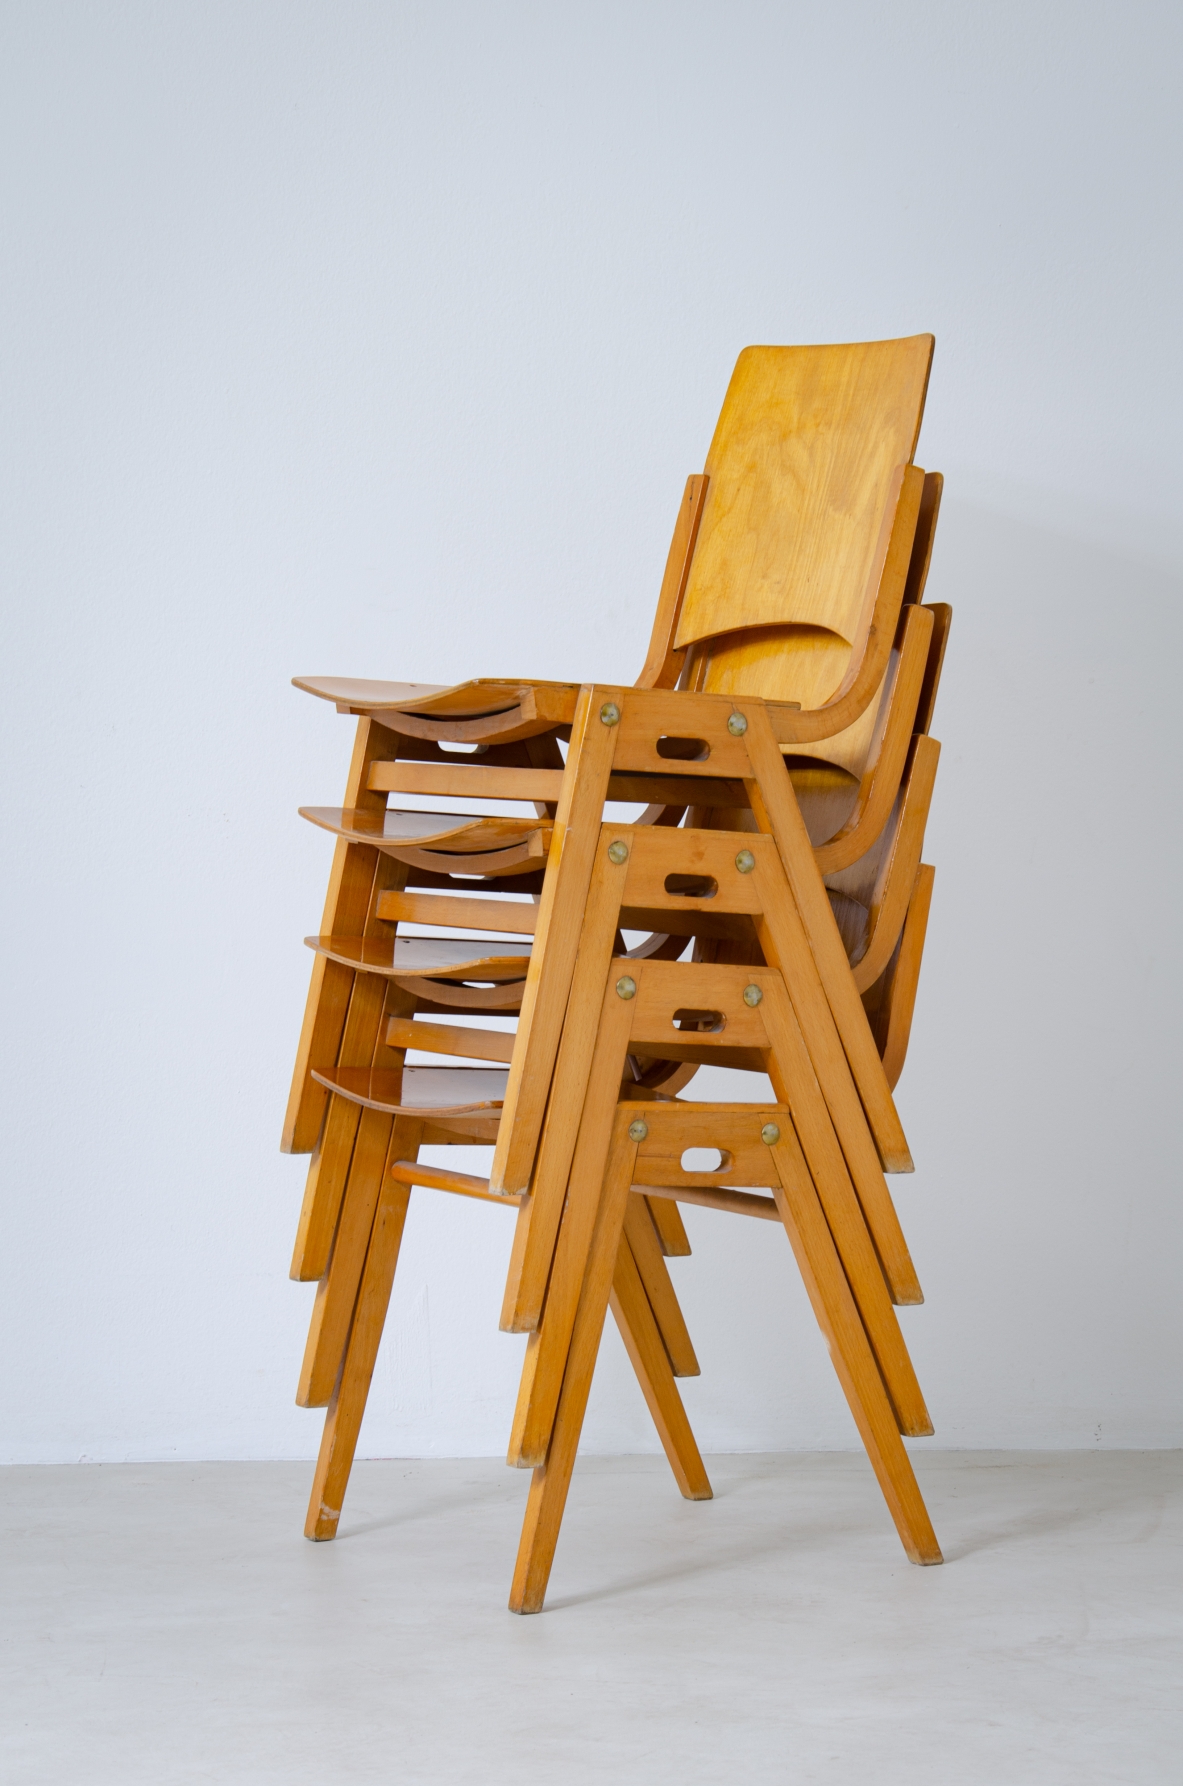 Roland Rainer (1910-2004) Set of 8 mid century modern stacking chairs model P7 in curved plywood. Manufacture Emil & Alfred Pollak, Vienna, 1952.